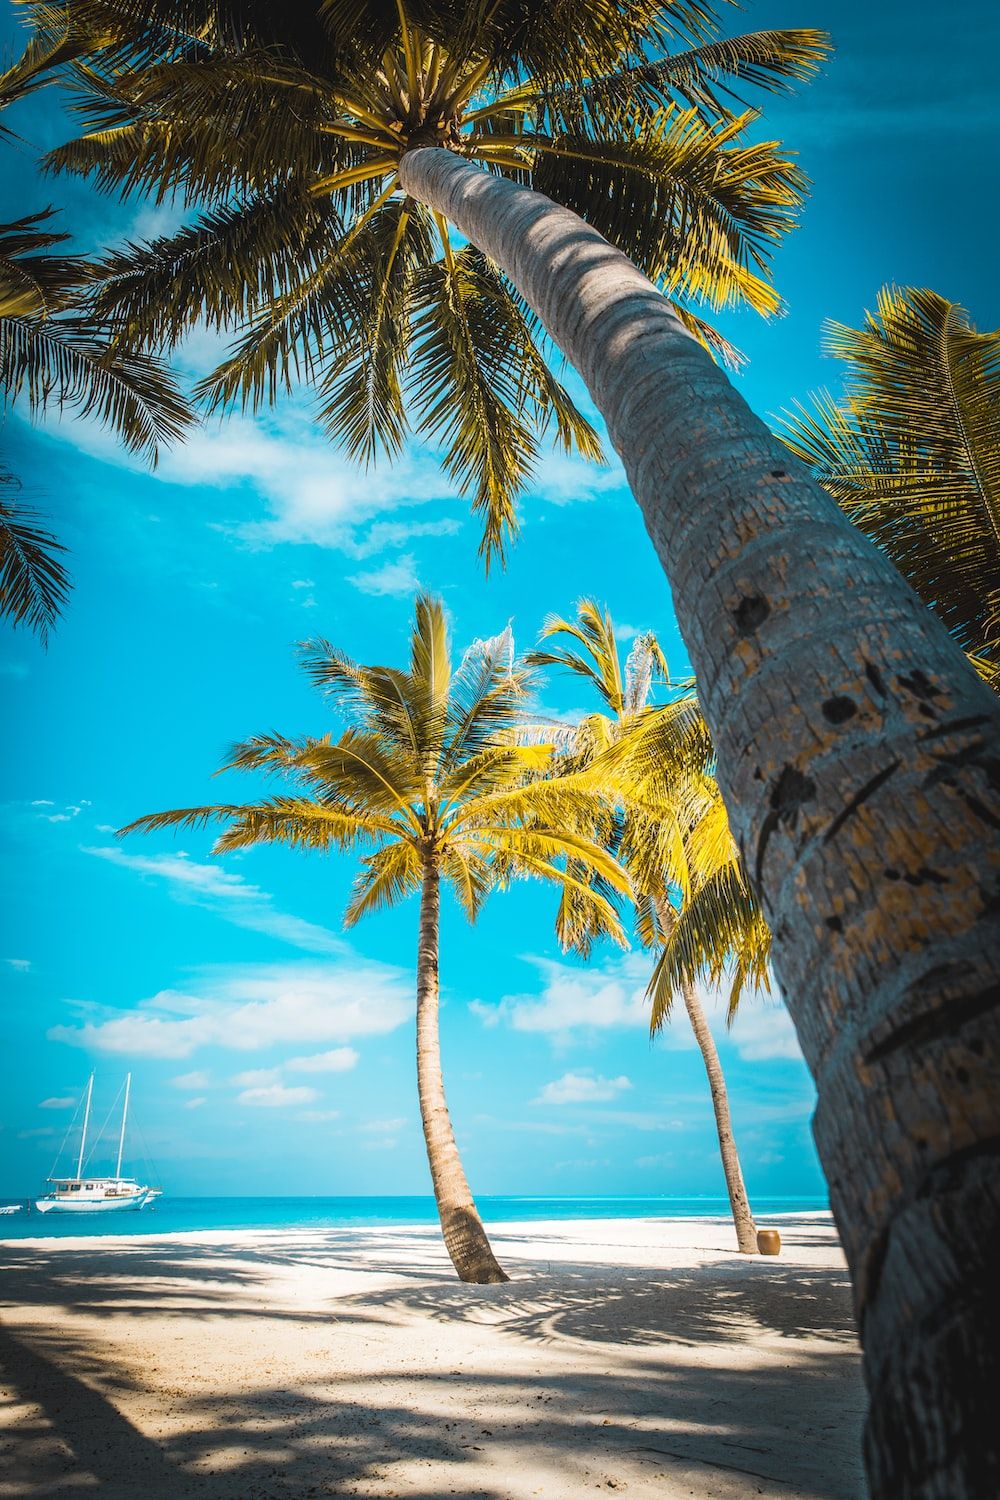 A beach with palm trees and a boat in the distance. - Palm tree, coconut